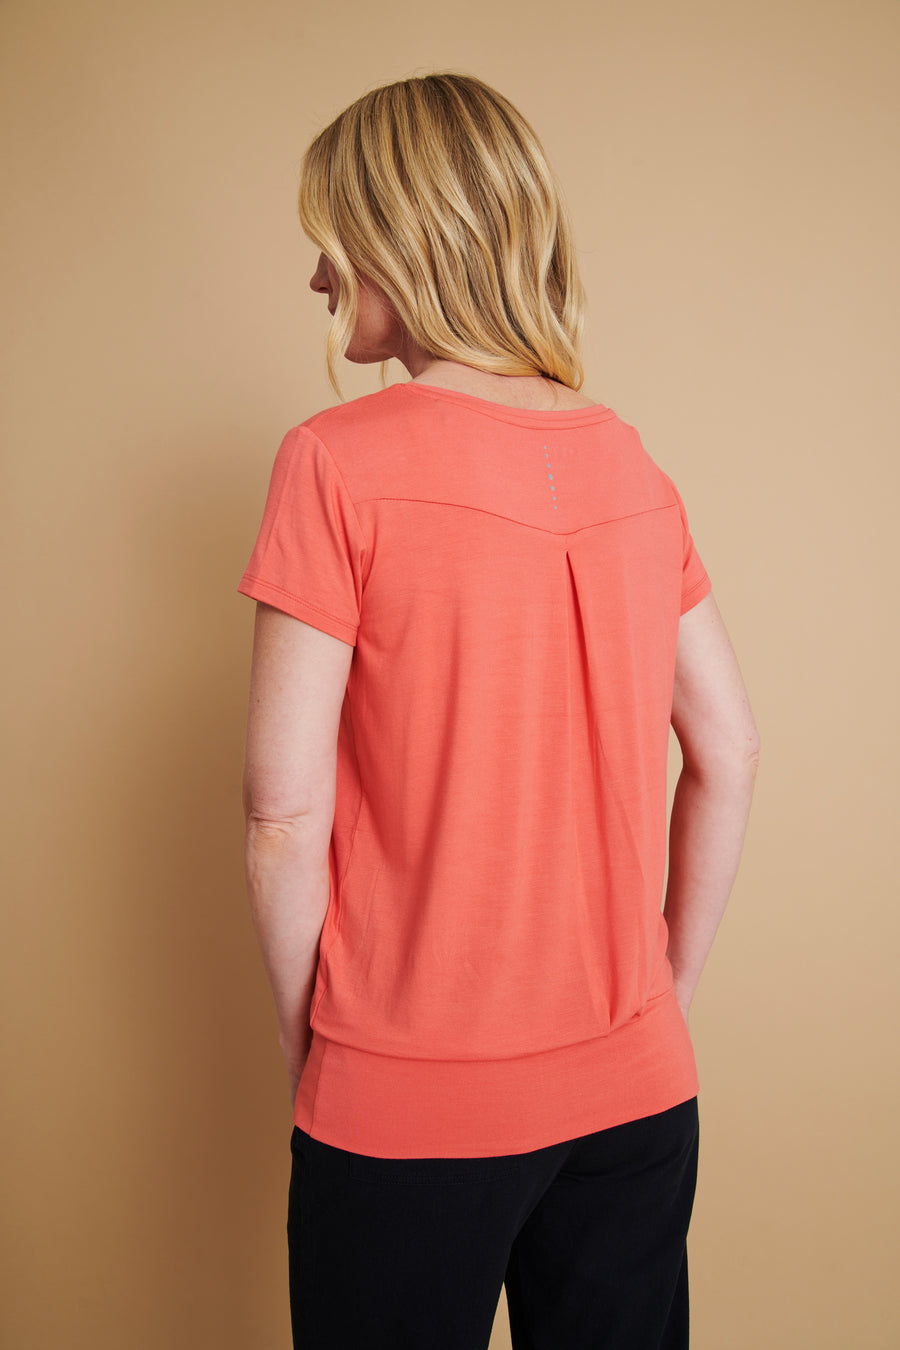 Smooth You Tee - Coral